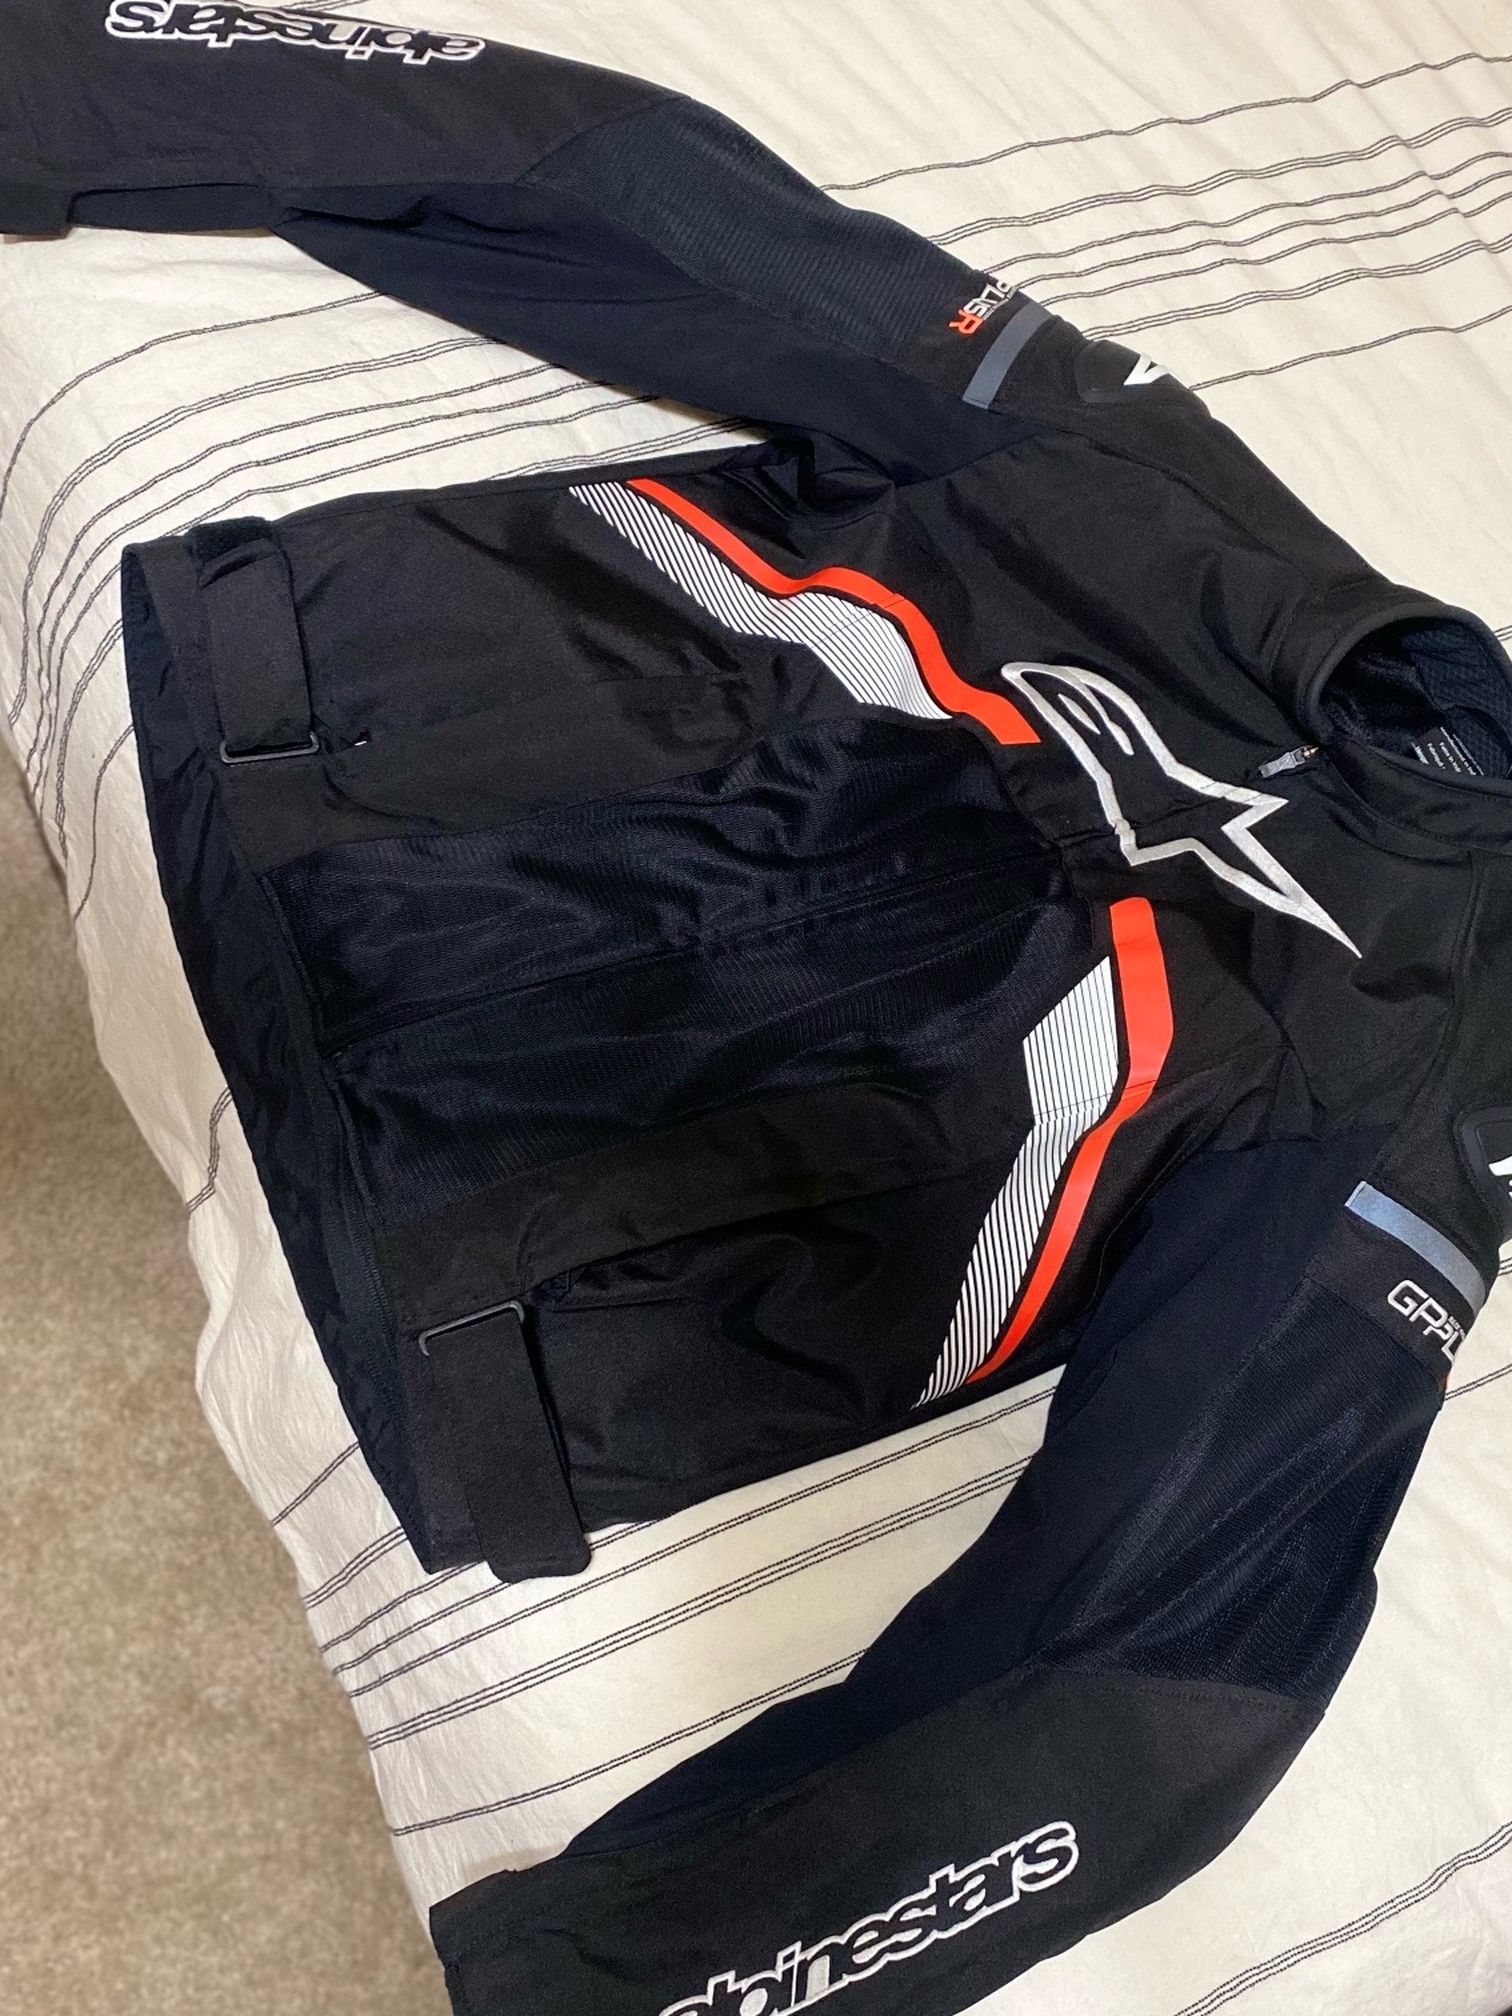 2 months alpinestar Italy made alpinestar jacket and back protector